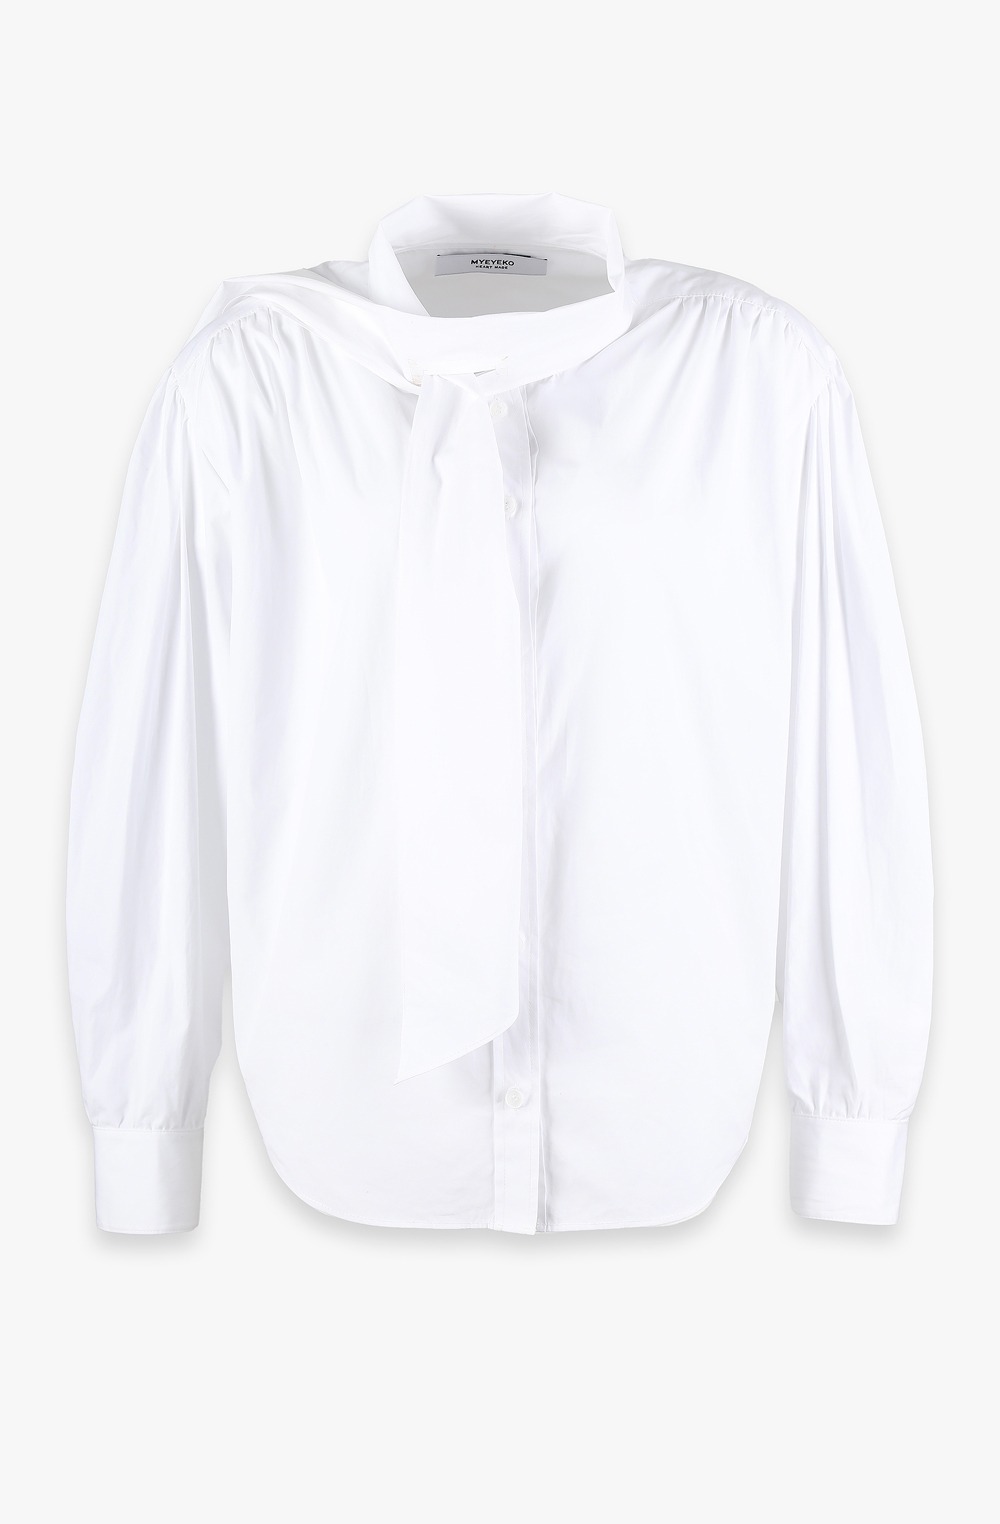 HIGH QUALITY LINE - Lily Tie-neck Cotton Shirt (WHITE)